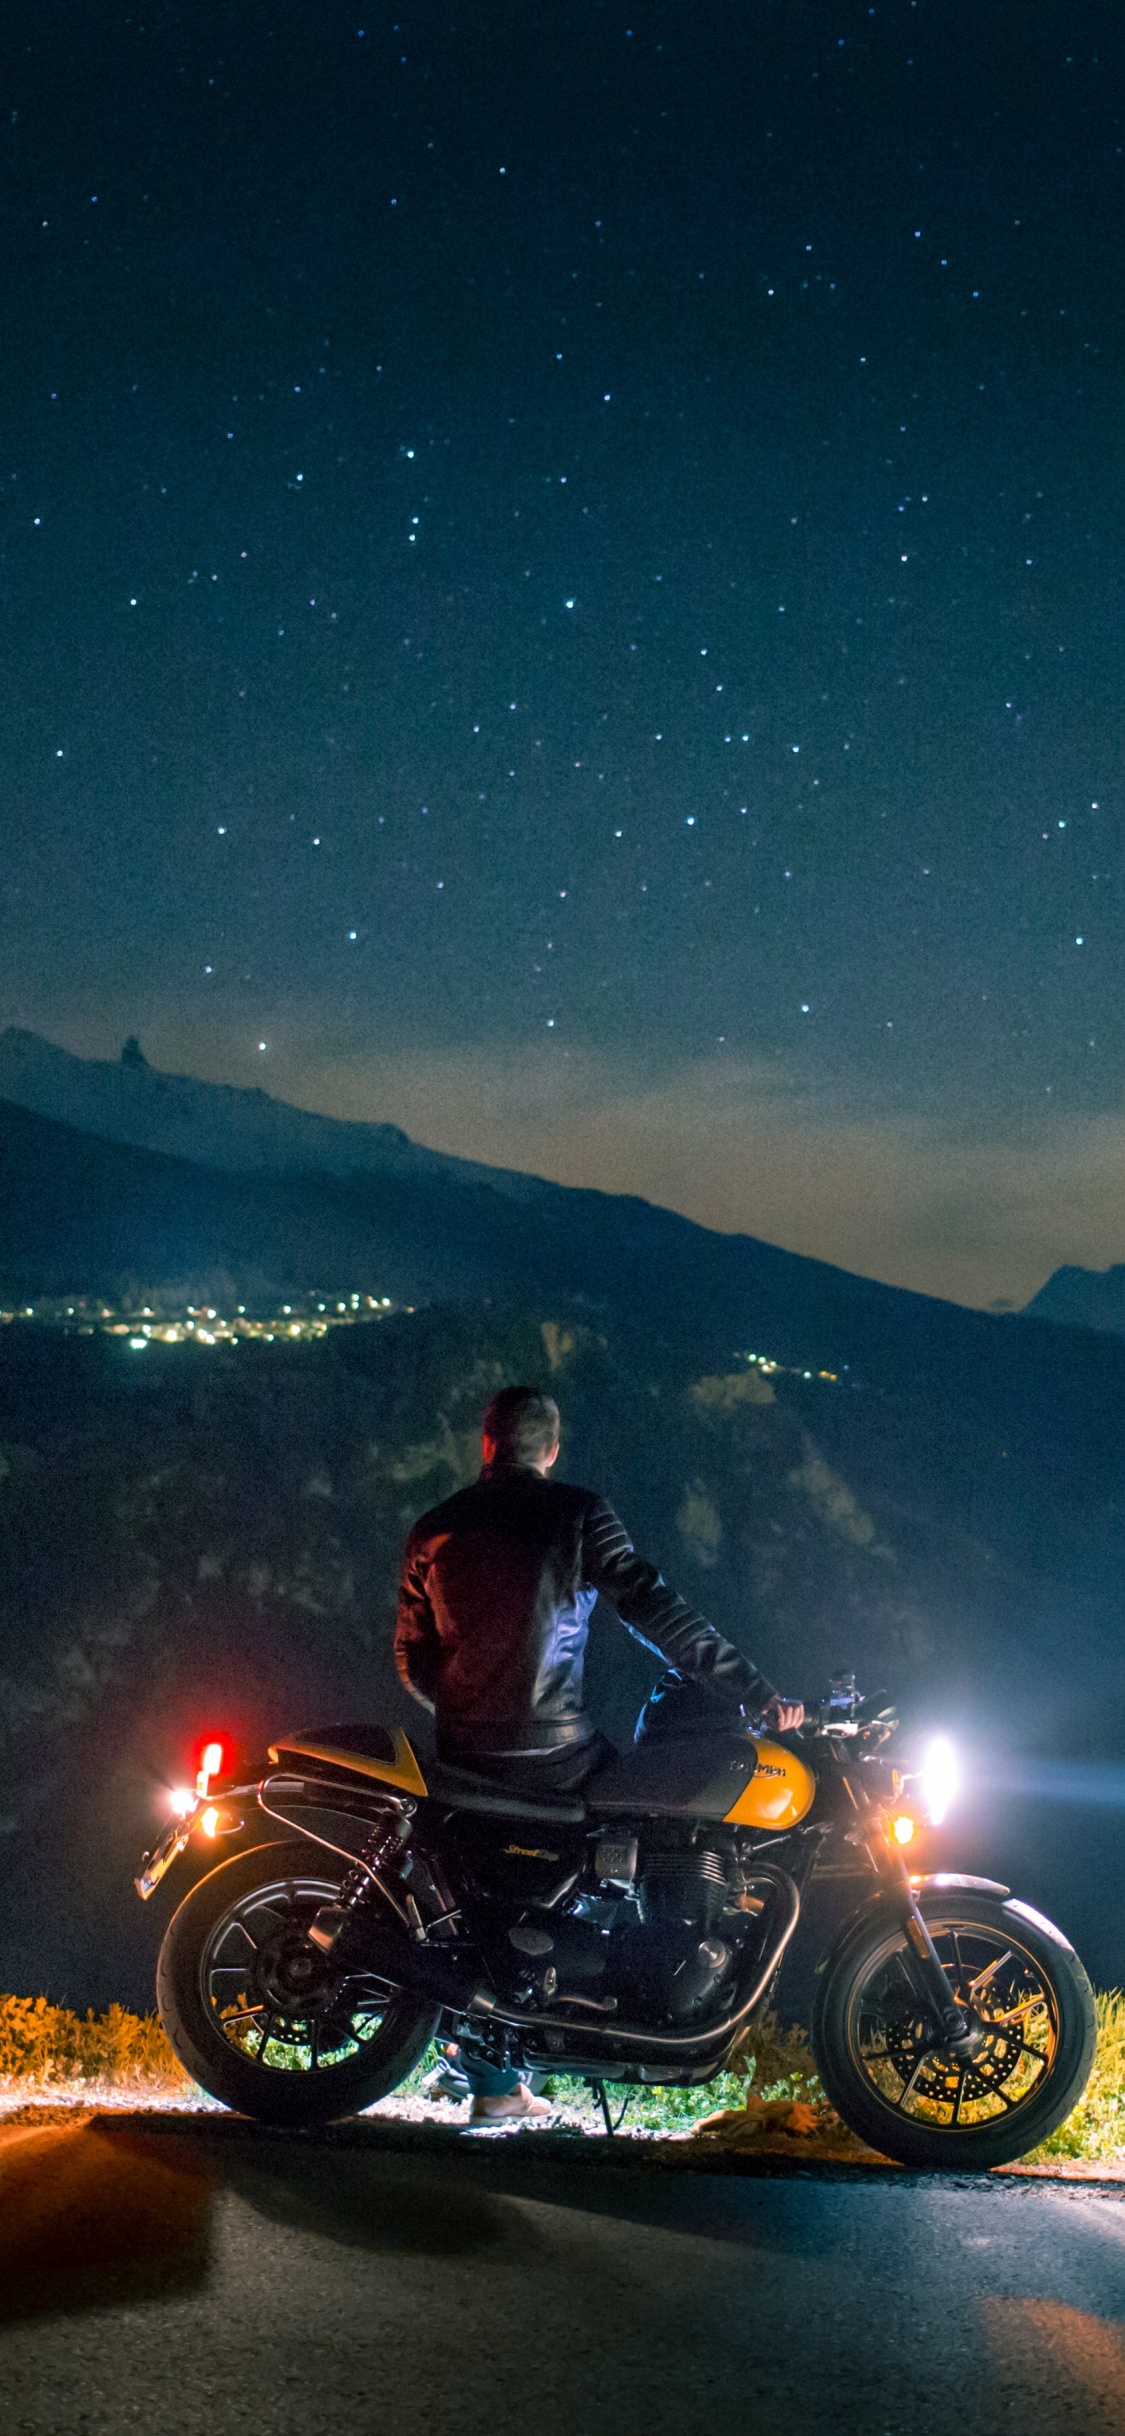 Man Riding Motorcycle on Road During Night Time. Wallpaper in 1125x2436 Resolution